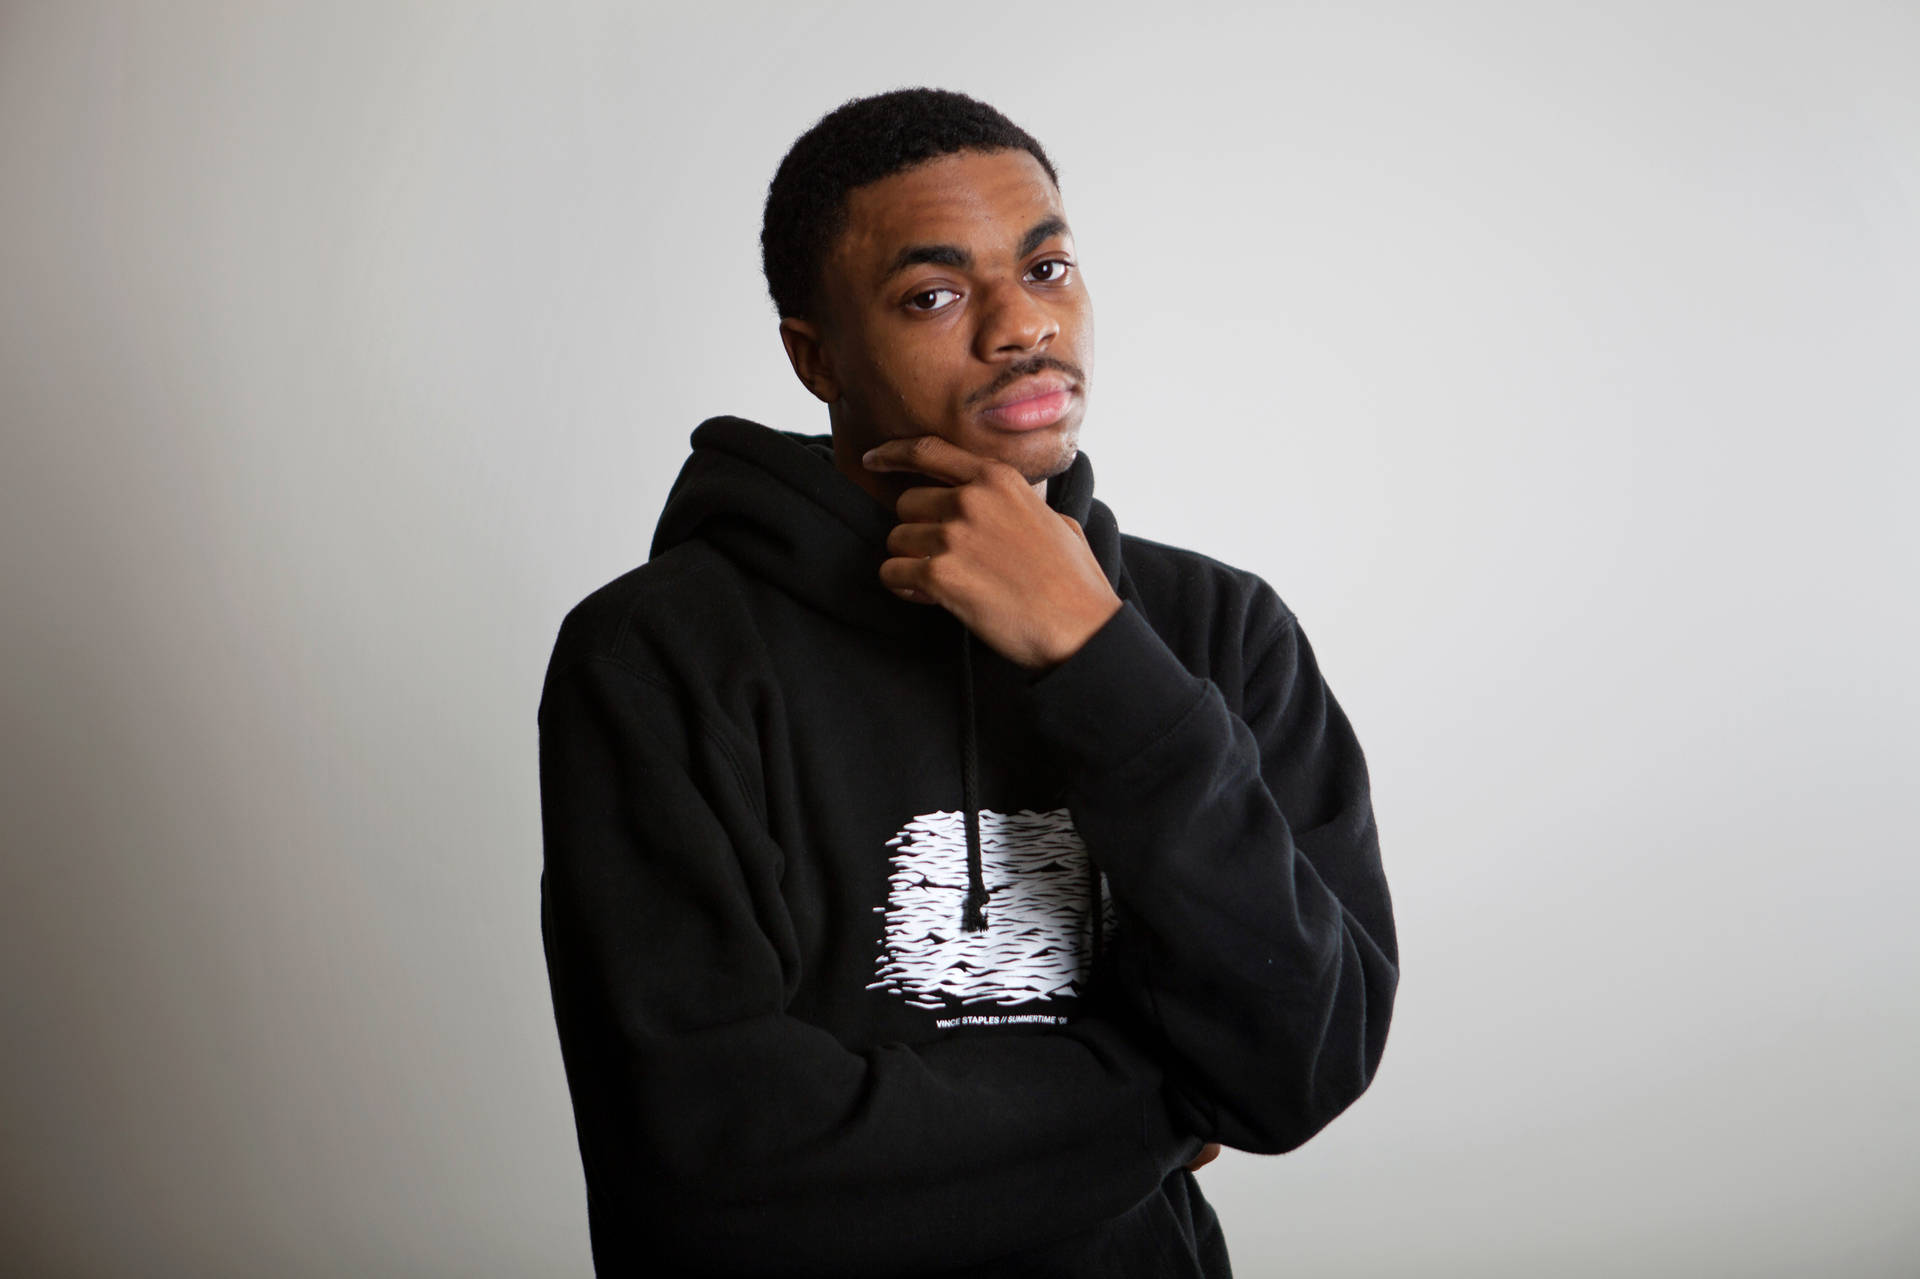 Musician Vince Staples Background